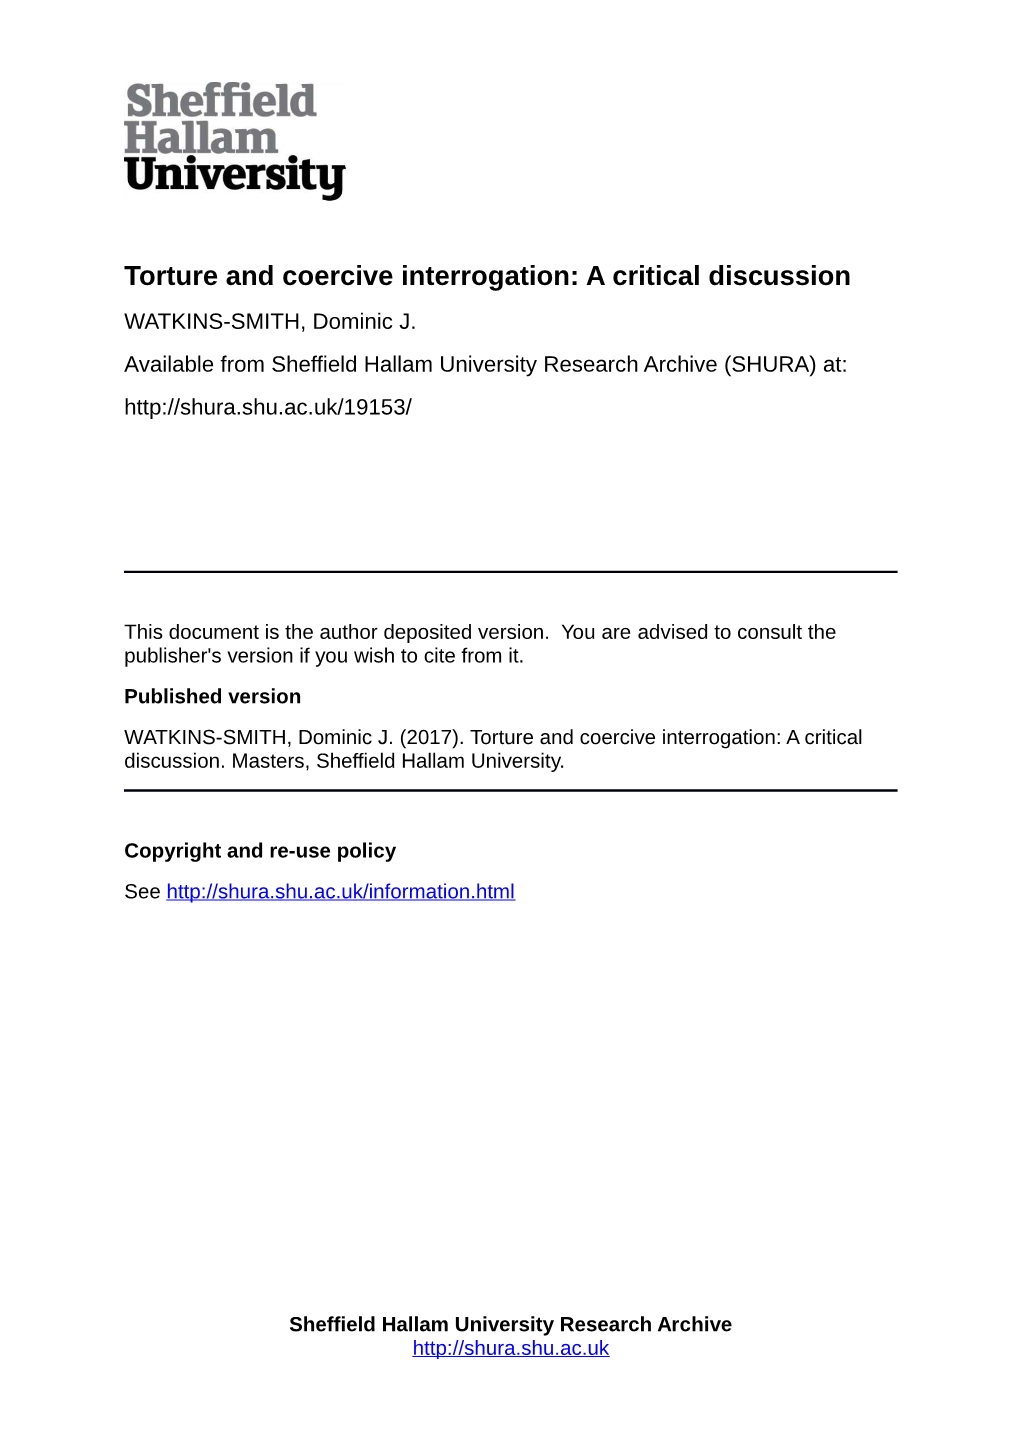 Torture and Coercive Interrogation: a Critical Discussion WATKINS-SMITH, Dominic J